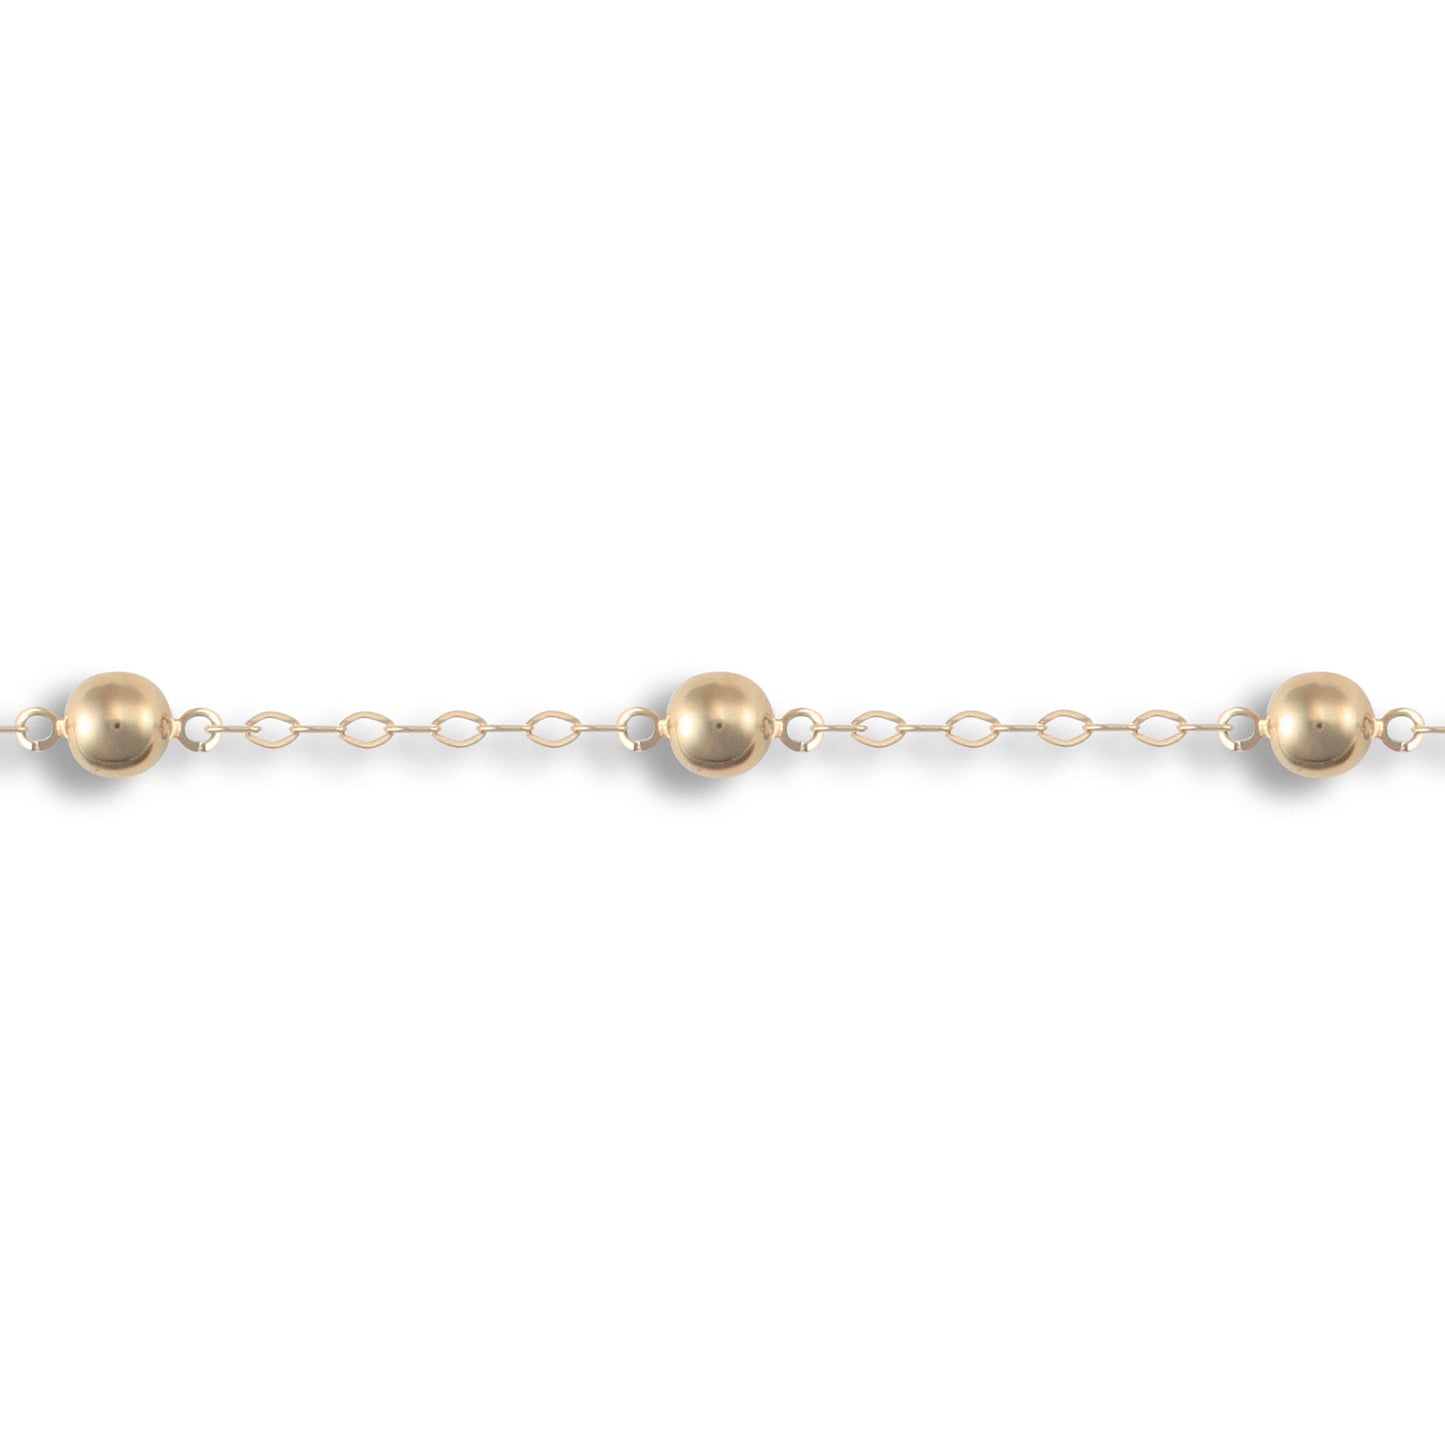 9ct Gold  Beads By The Inch 2.2mm & 6mm Bead Bracelet - JBB311